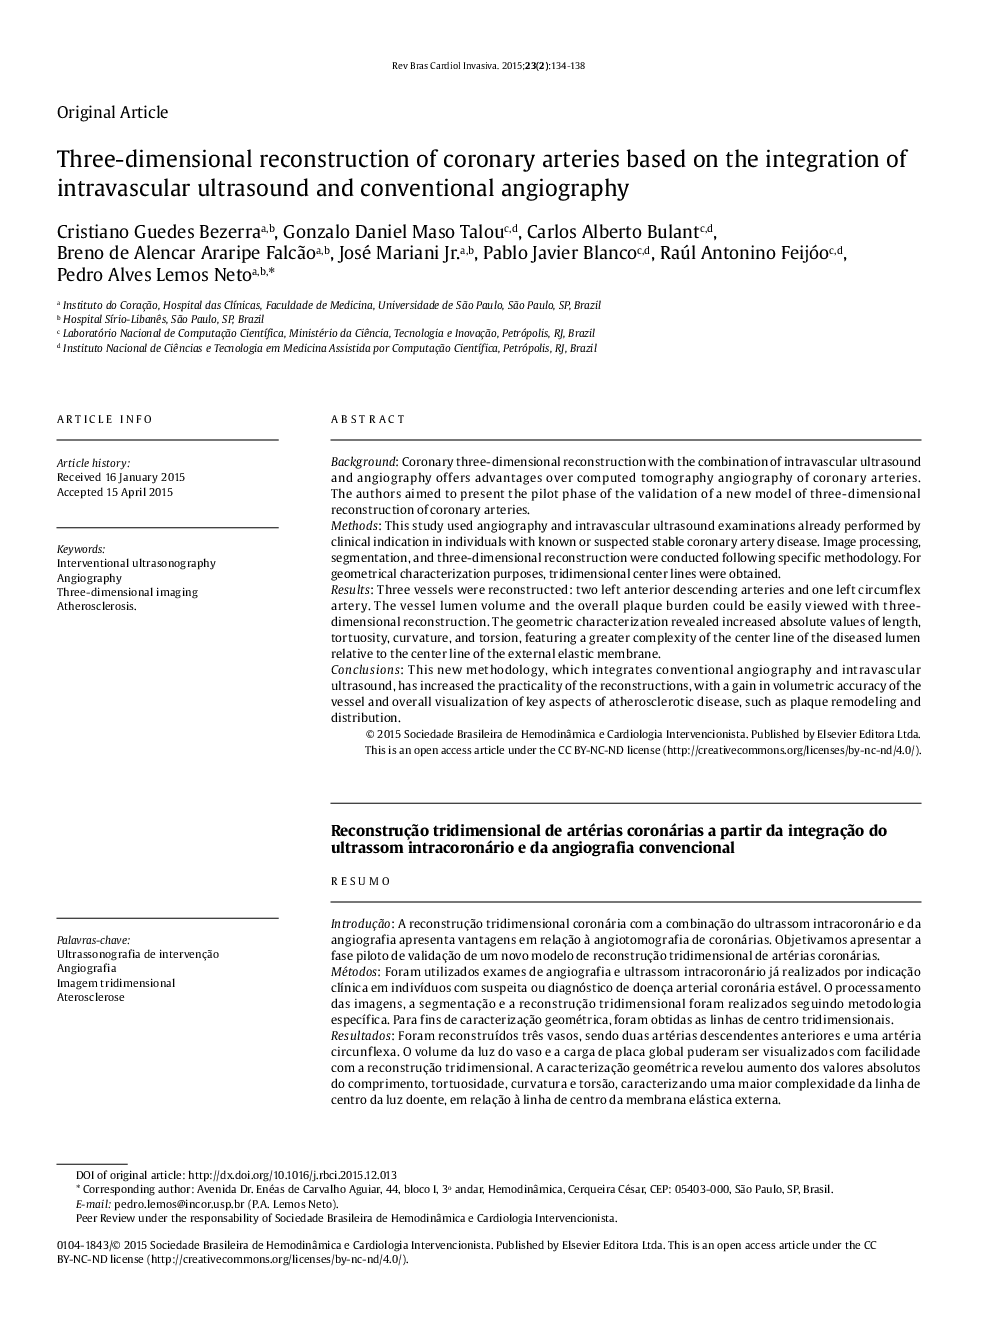 Three-dimensional reconstruction of coronary arteries based on the integration of intravascular ultrasound and conventional angiography 